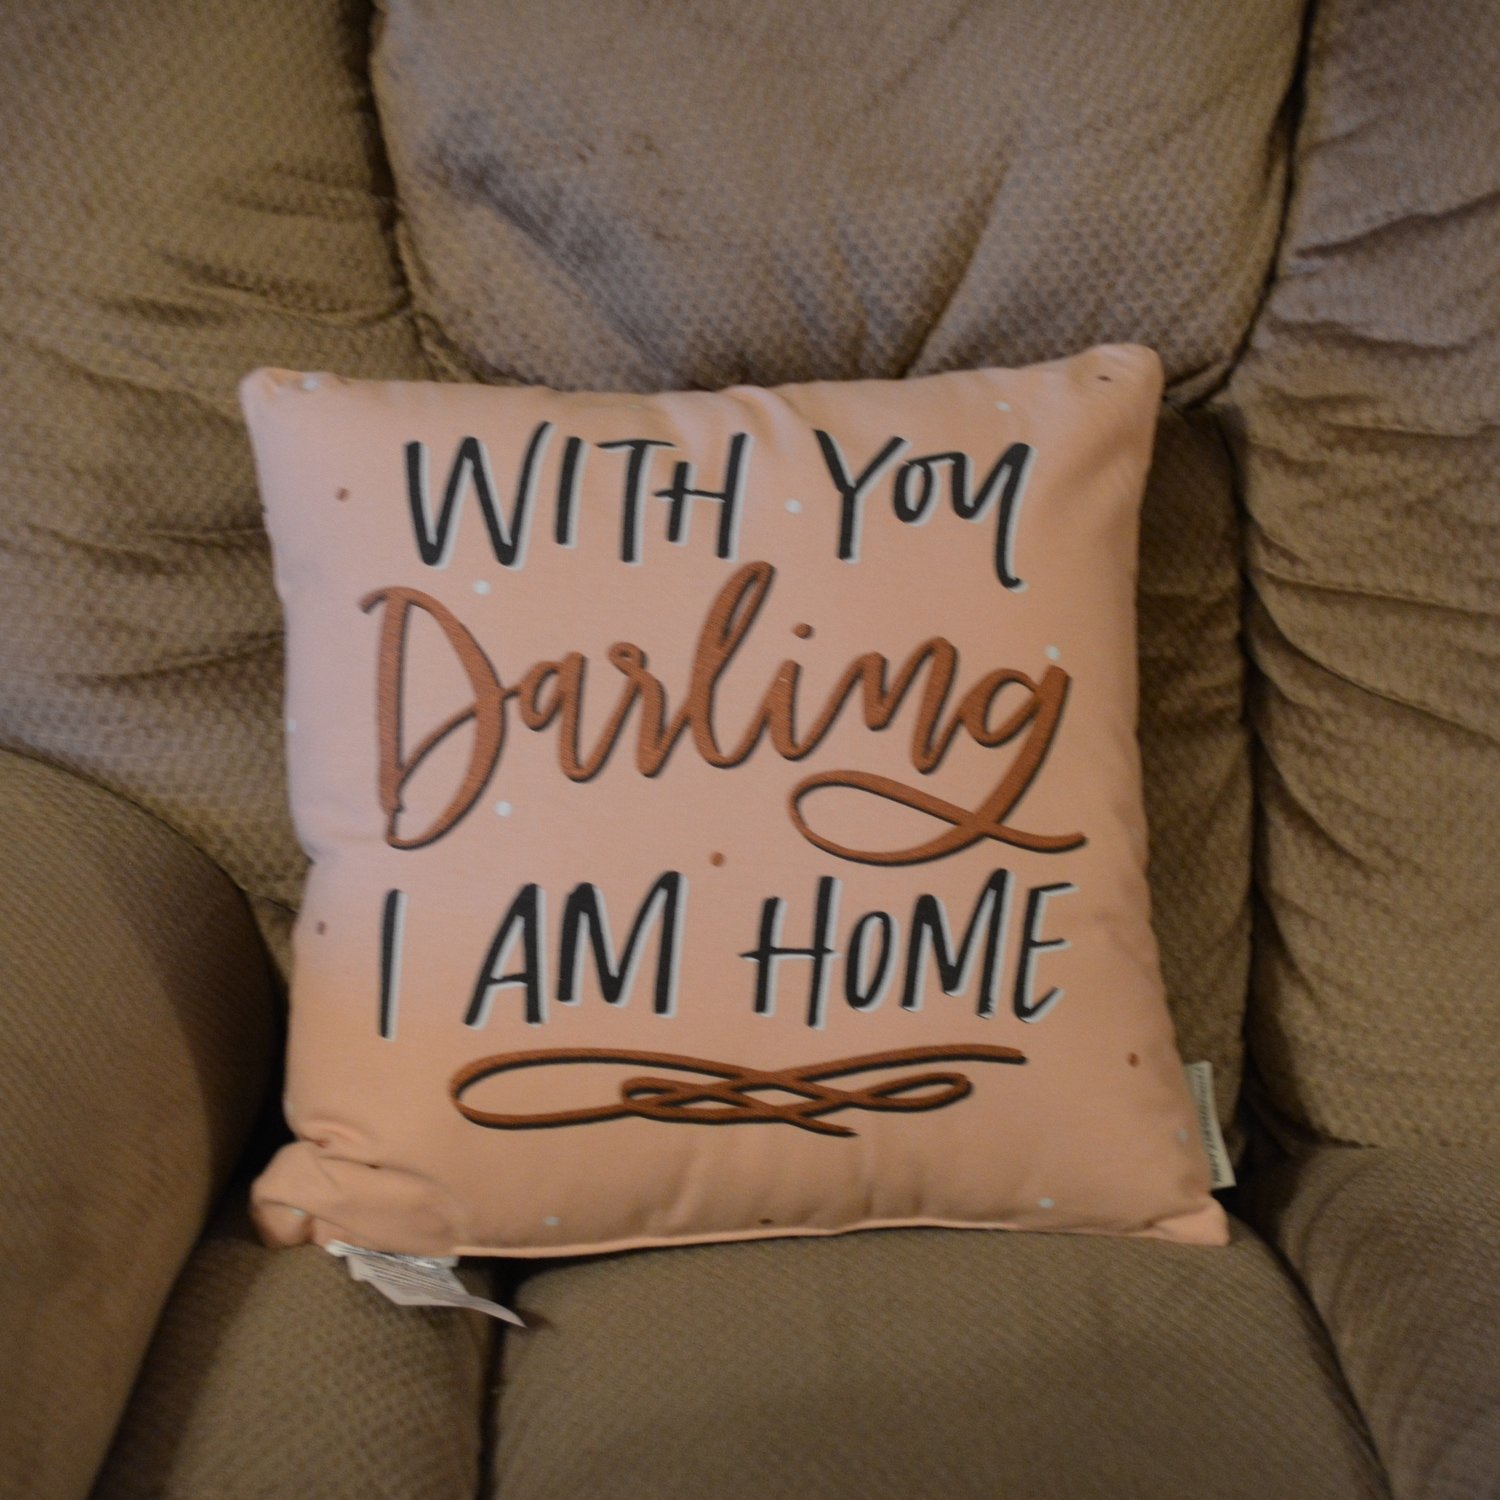 With You Darling I Am Home Primitives by Kathy pillow